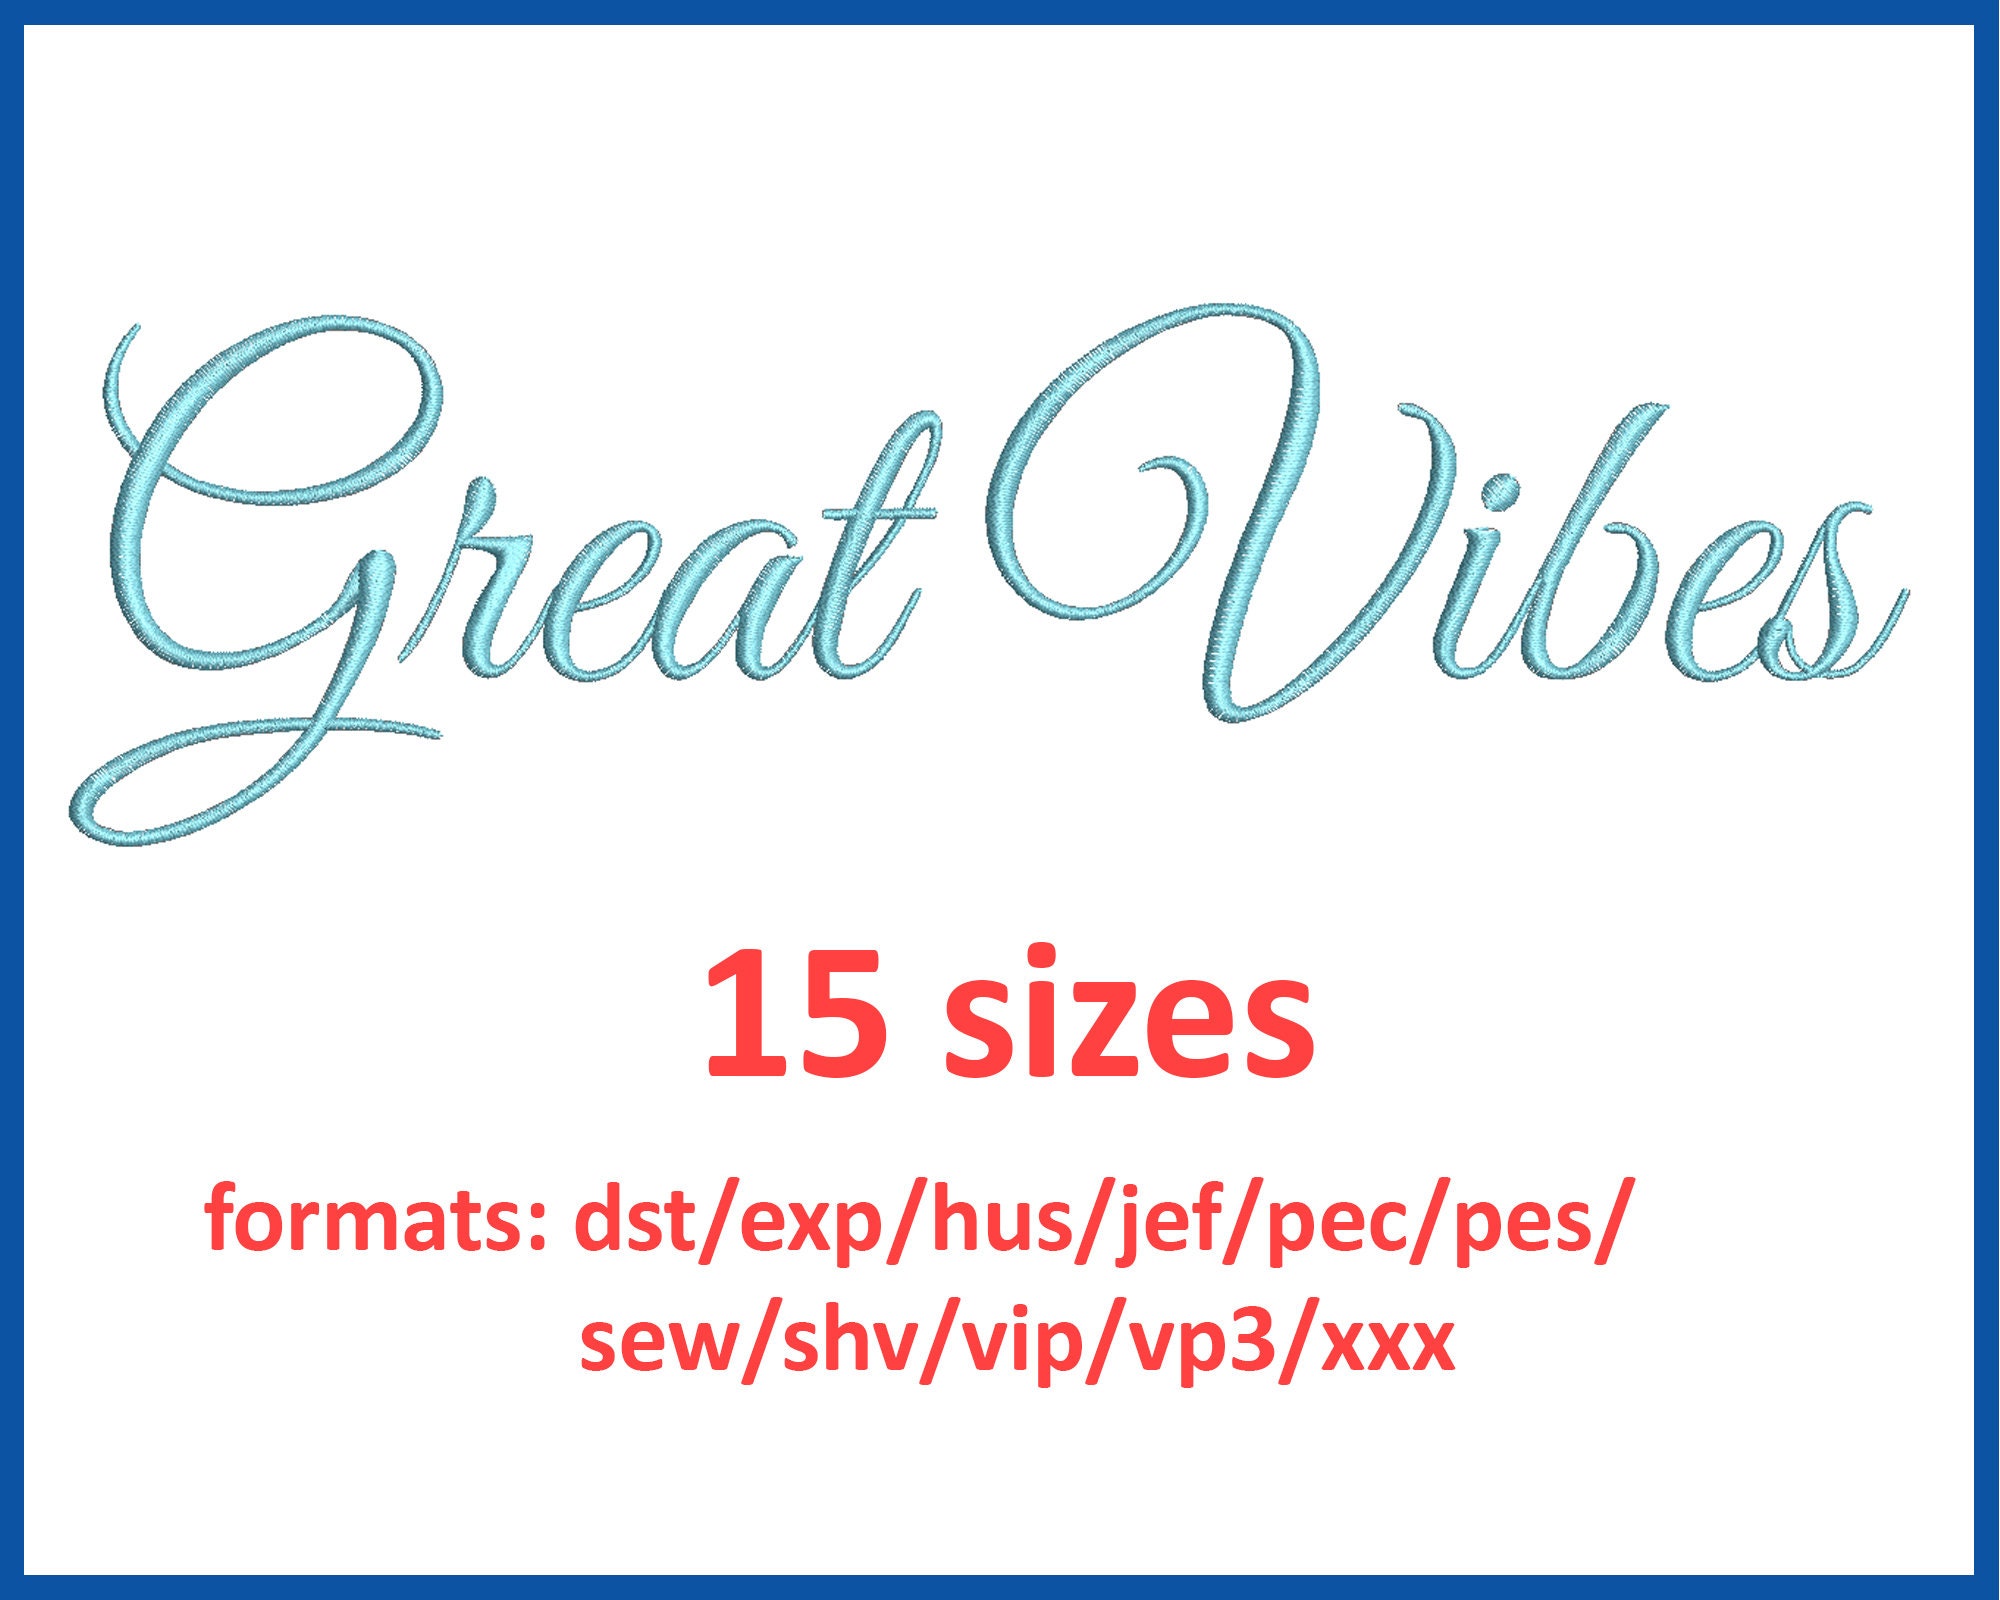 Great vibes. Great Vibes шрифт. Great Vibes font. Great Vibes font download.